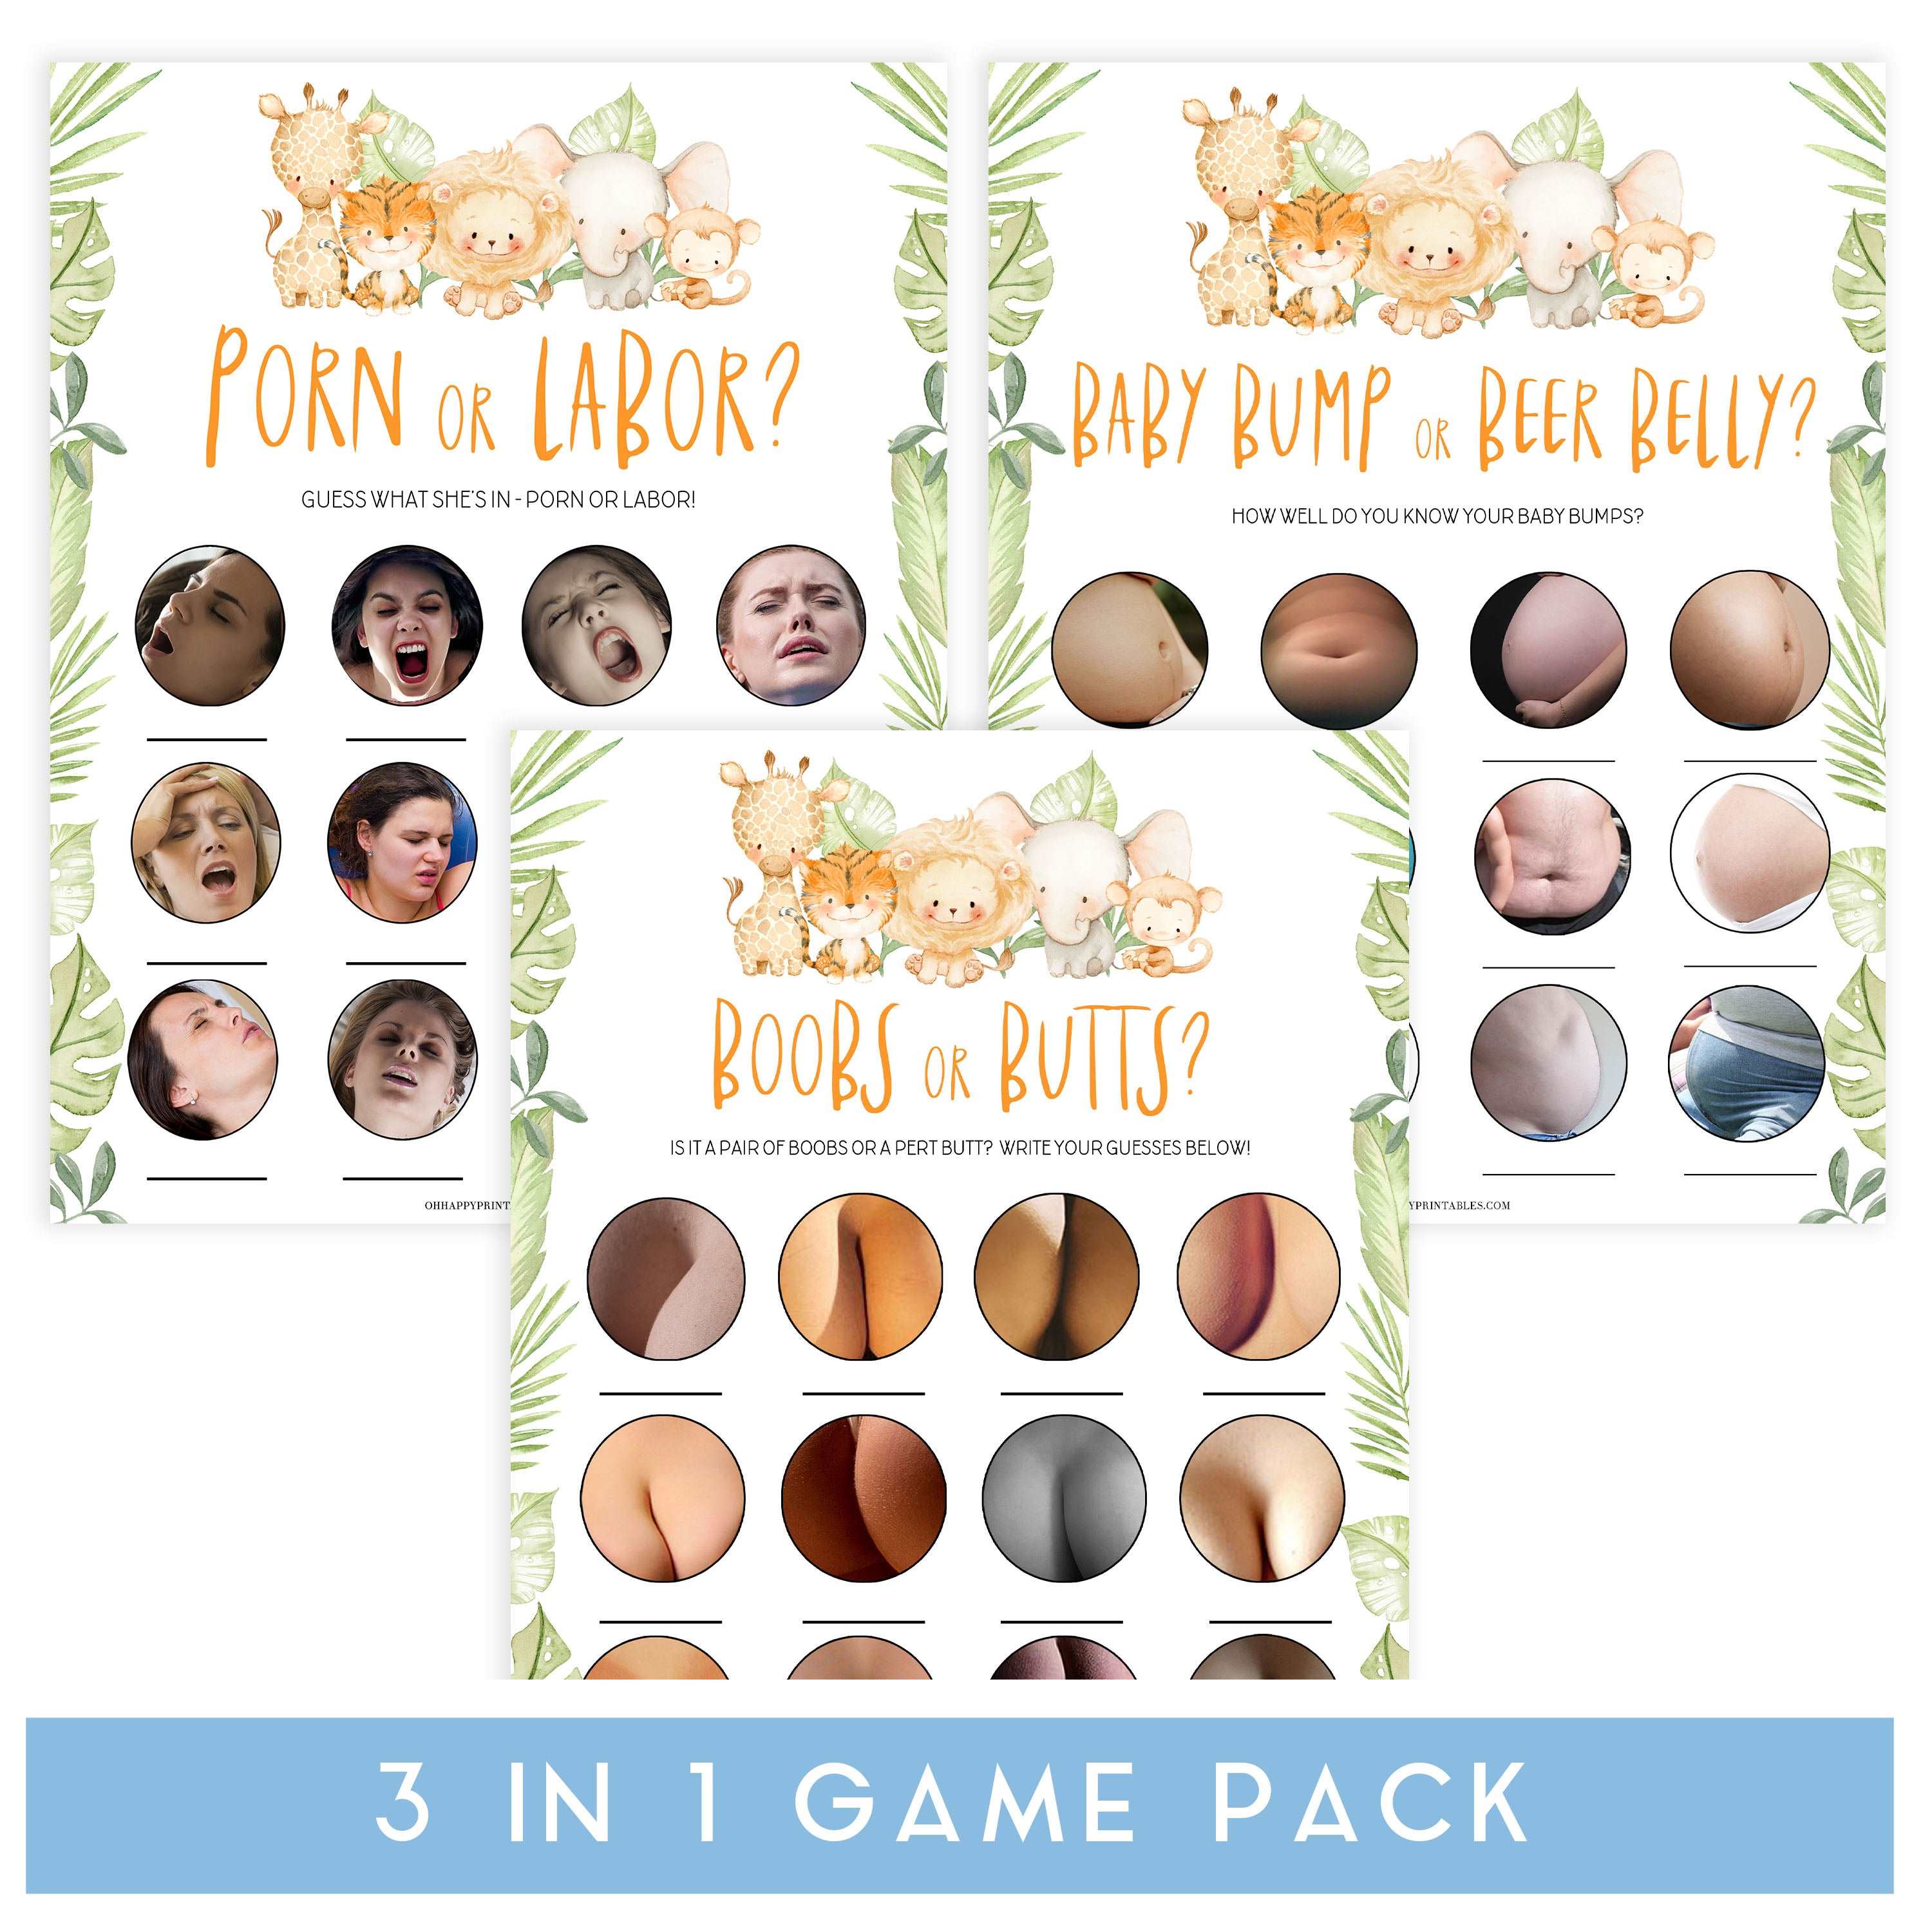 porn or labor, baby bump beer belly, boobs or butts games, Printable baby shower games, safari animals baby games, baby shower games, fun baby shower ideas, top baby shower ideas, safari animals baby shower, baby shower games, fun baby shower ideas